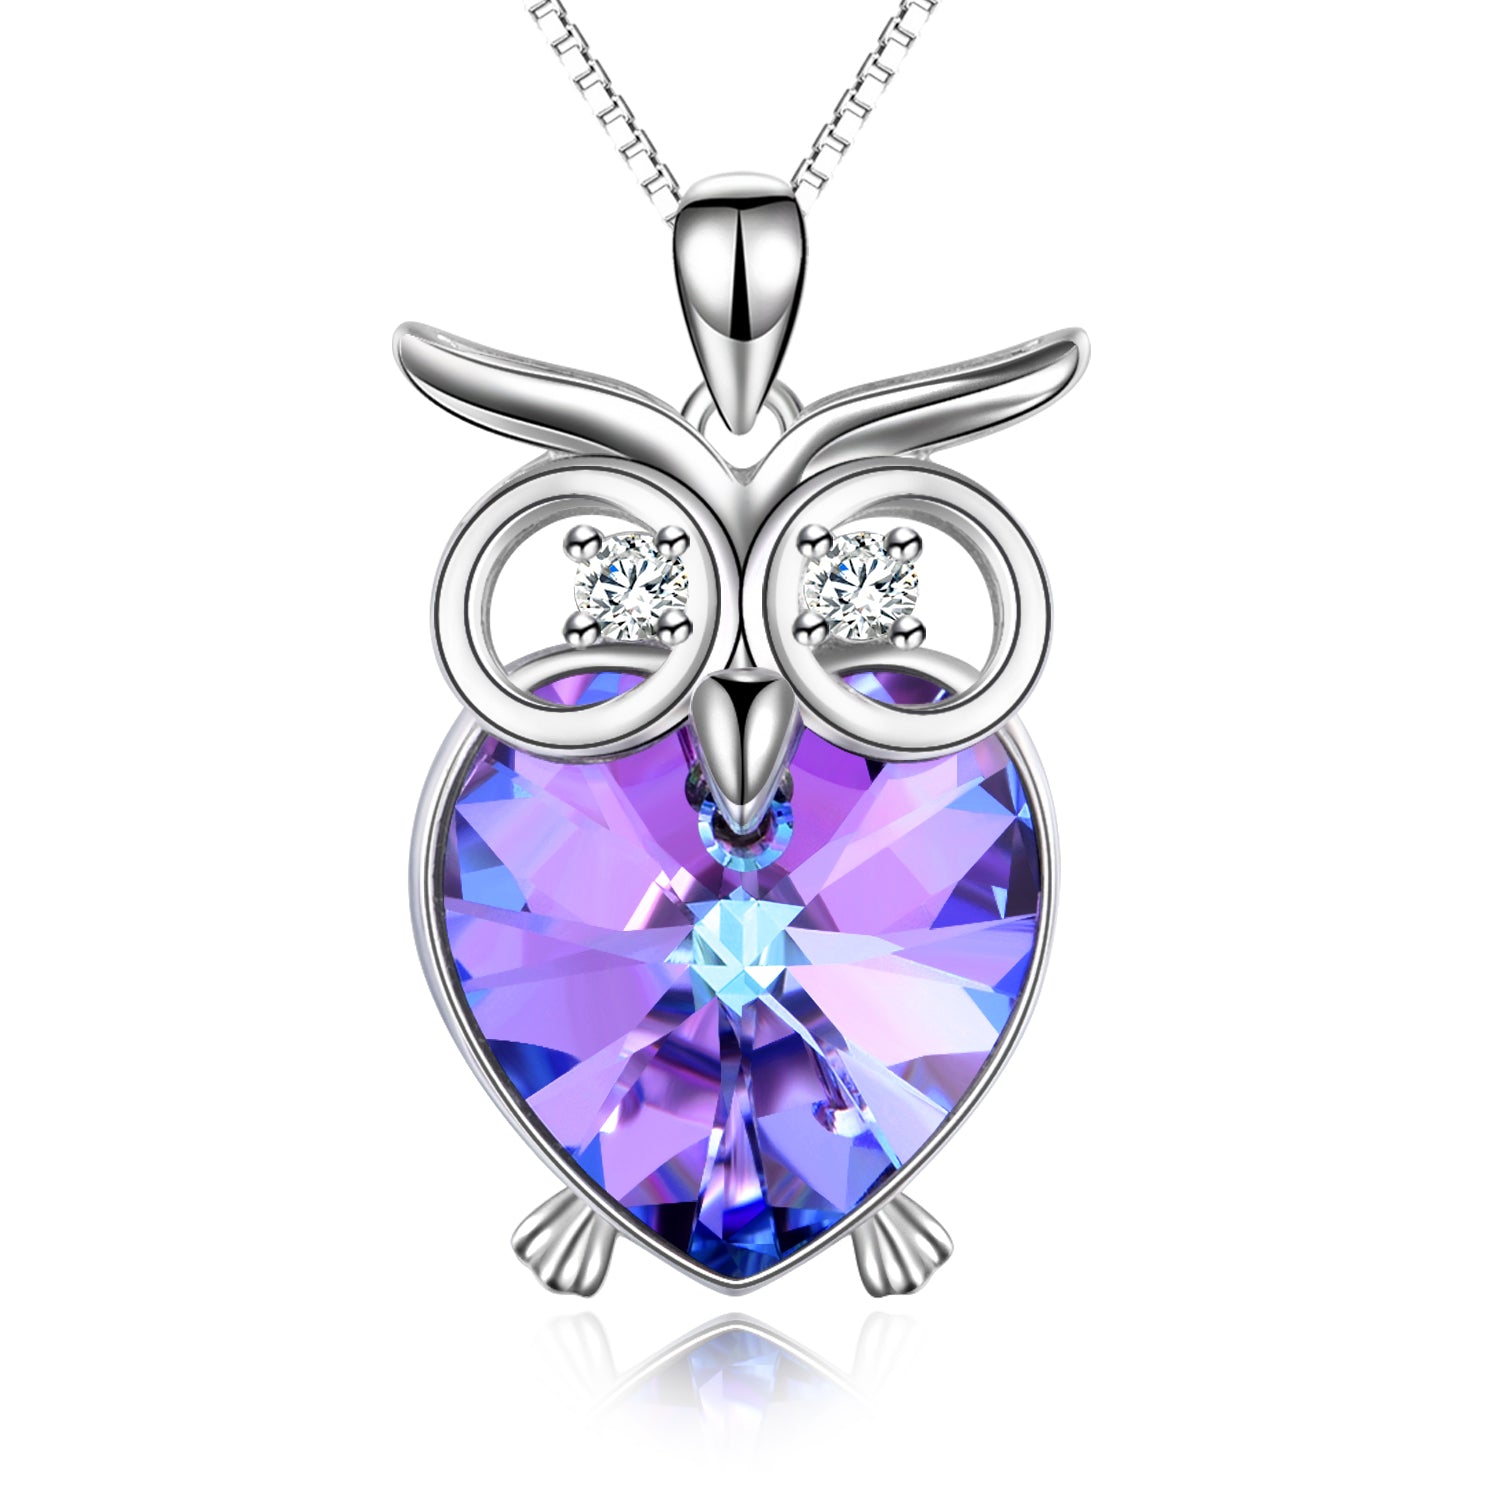 Crystal Owl Necklace Purple Color Gemstone Animal Jewelry Necklace